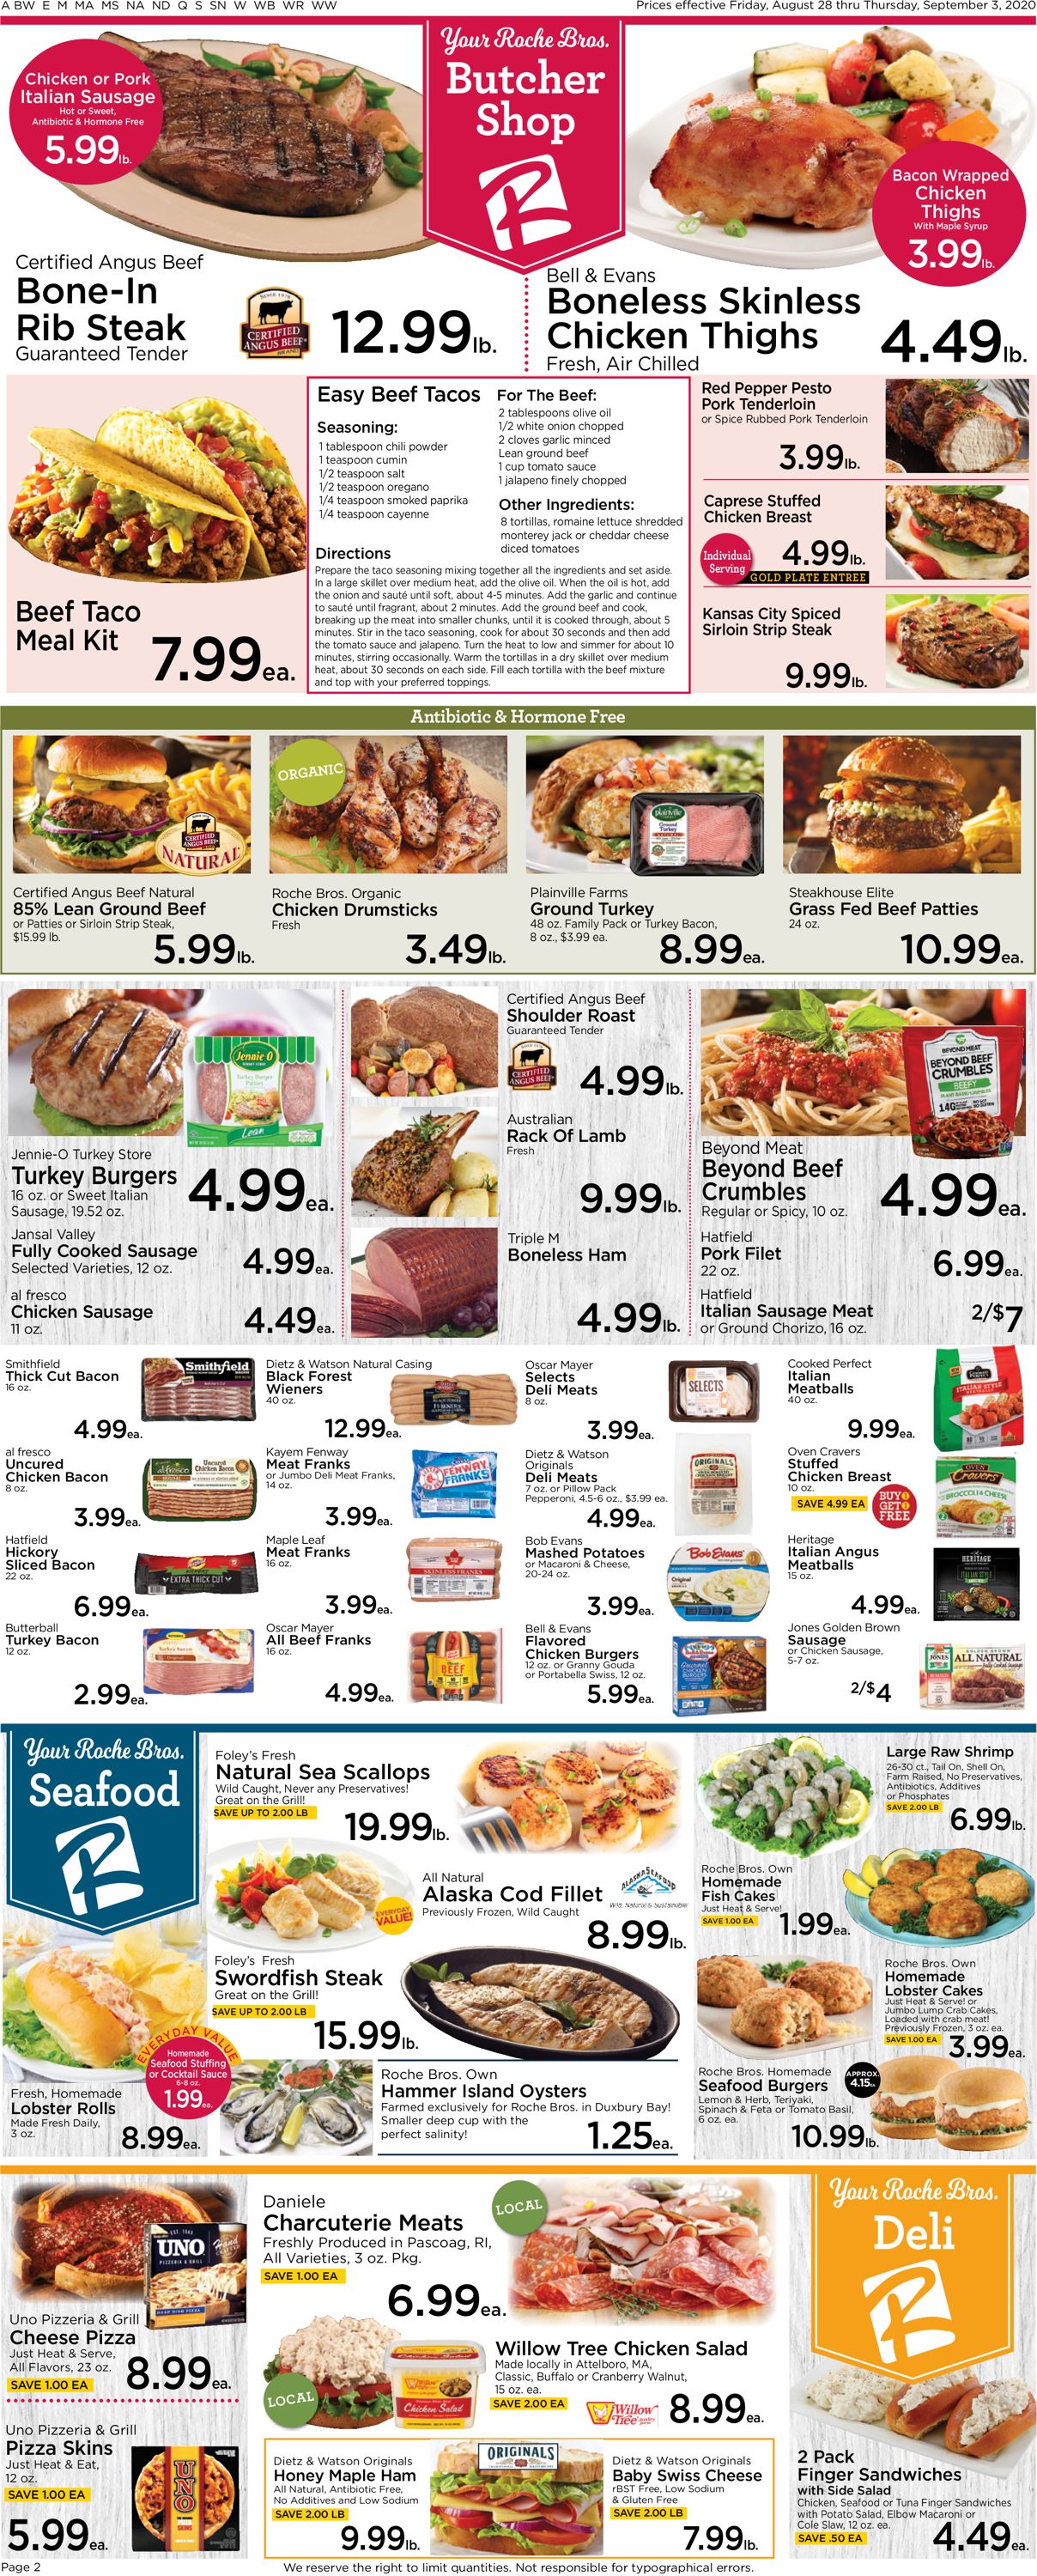 Catalogue Roche Bros. Supermarkets from 08/28/2020